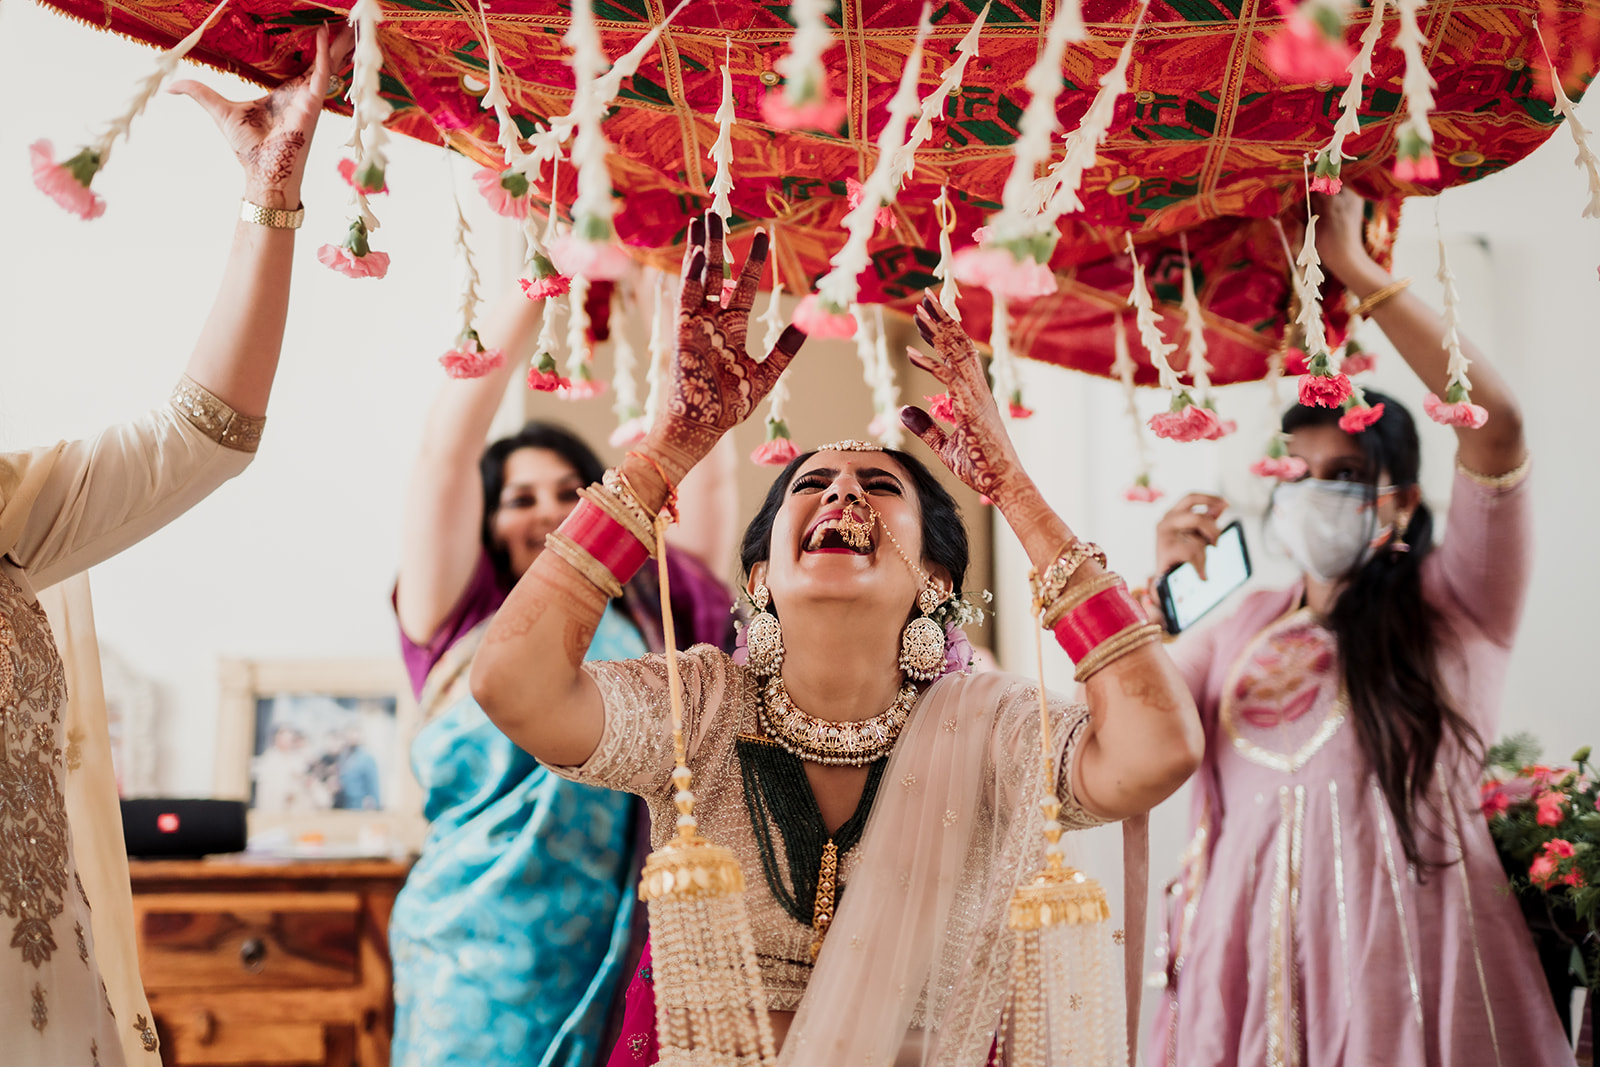 Aisle elegance: The bride makes her entrance, adorned by a lovely chadar, creating a scene of timeless beauty